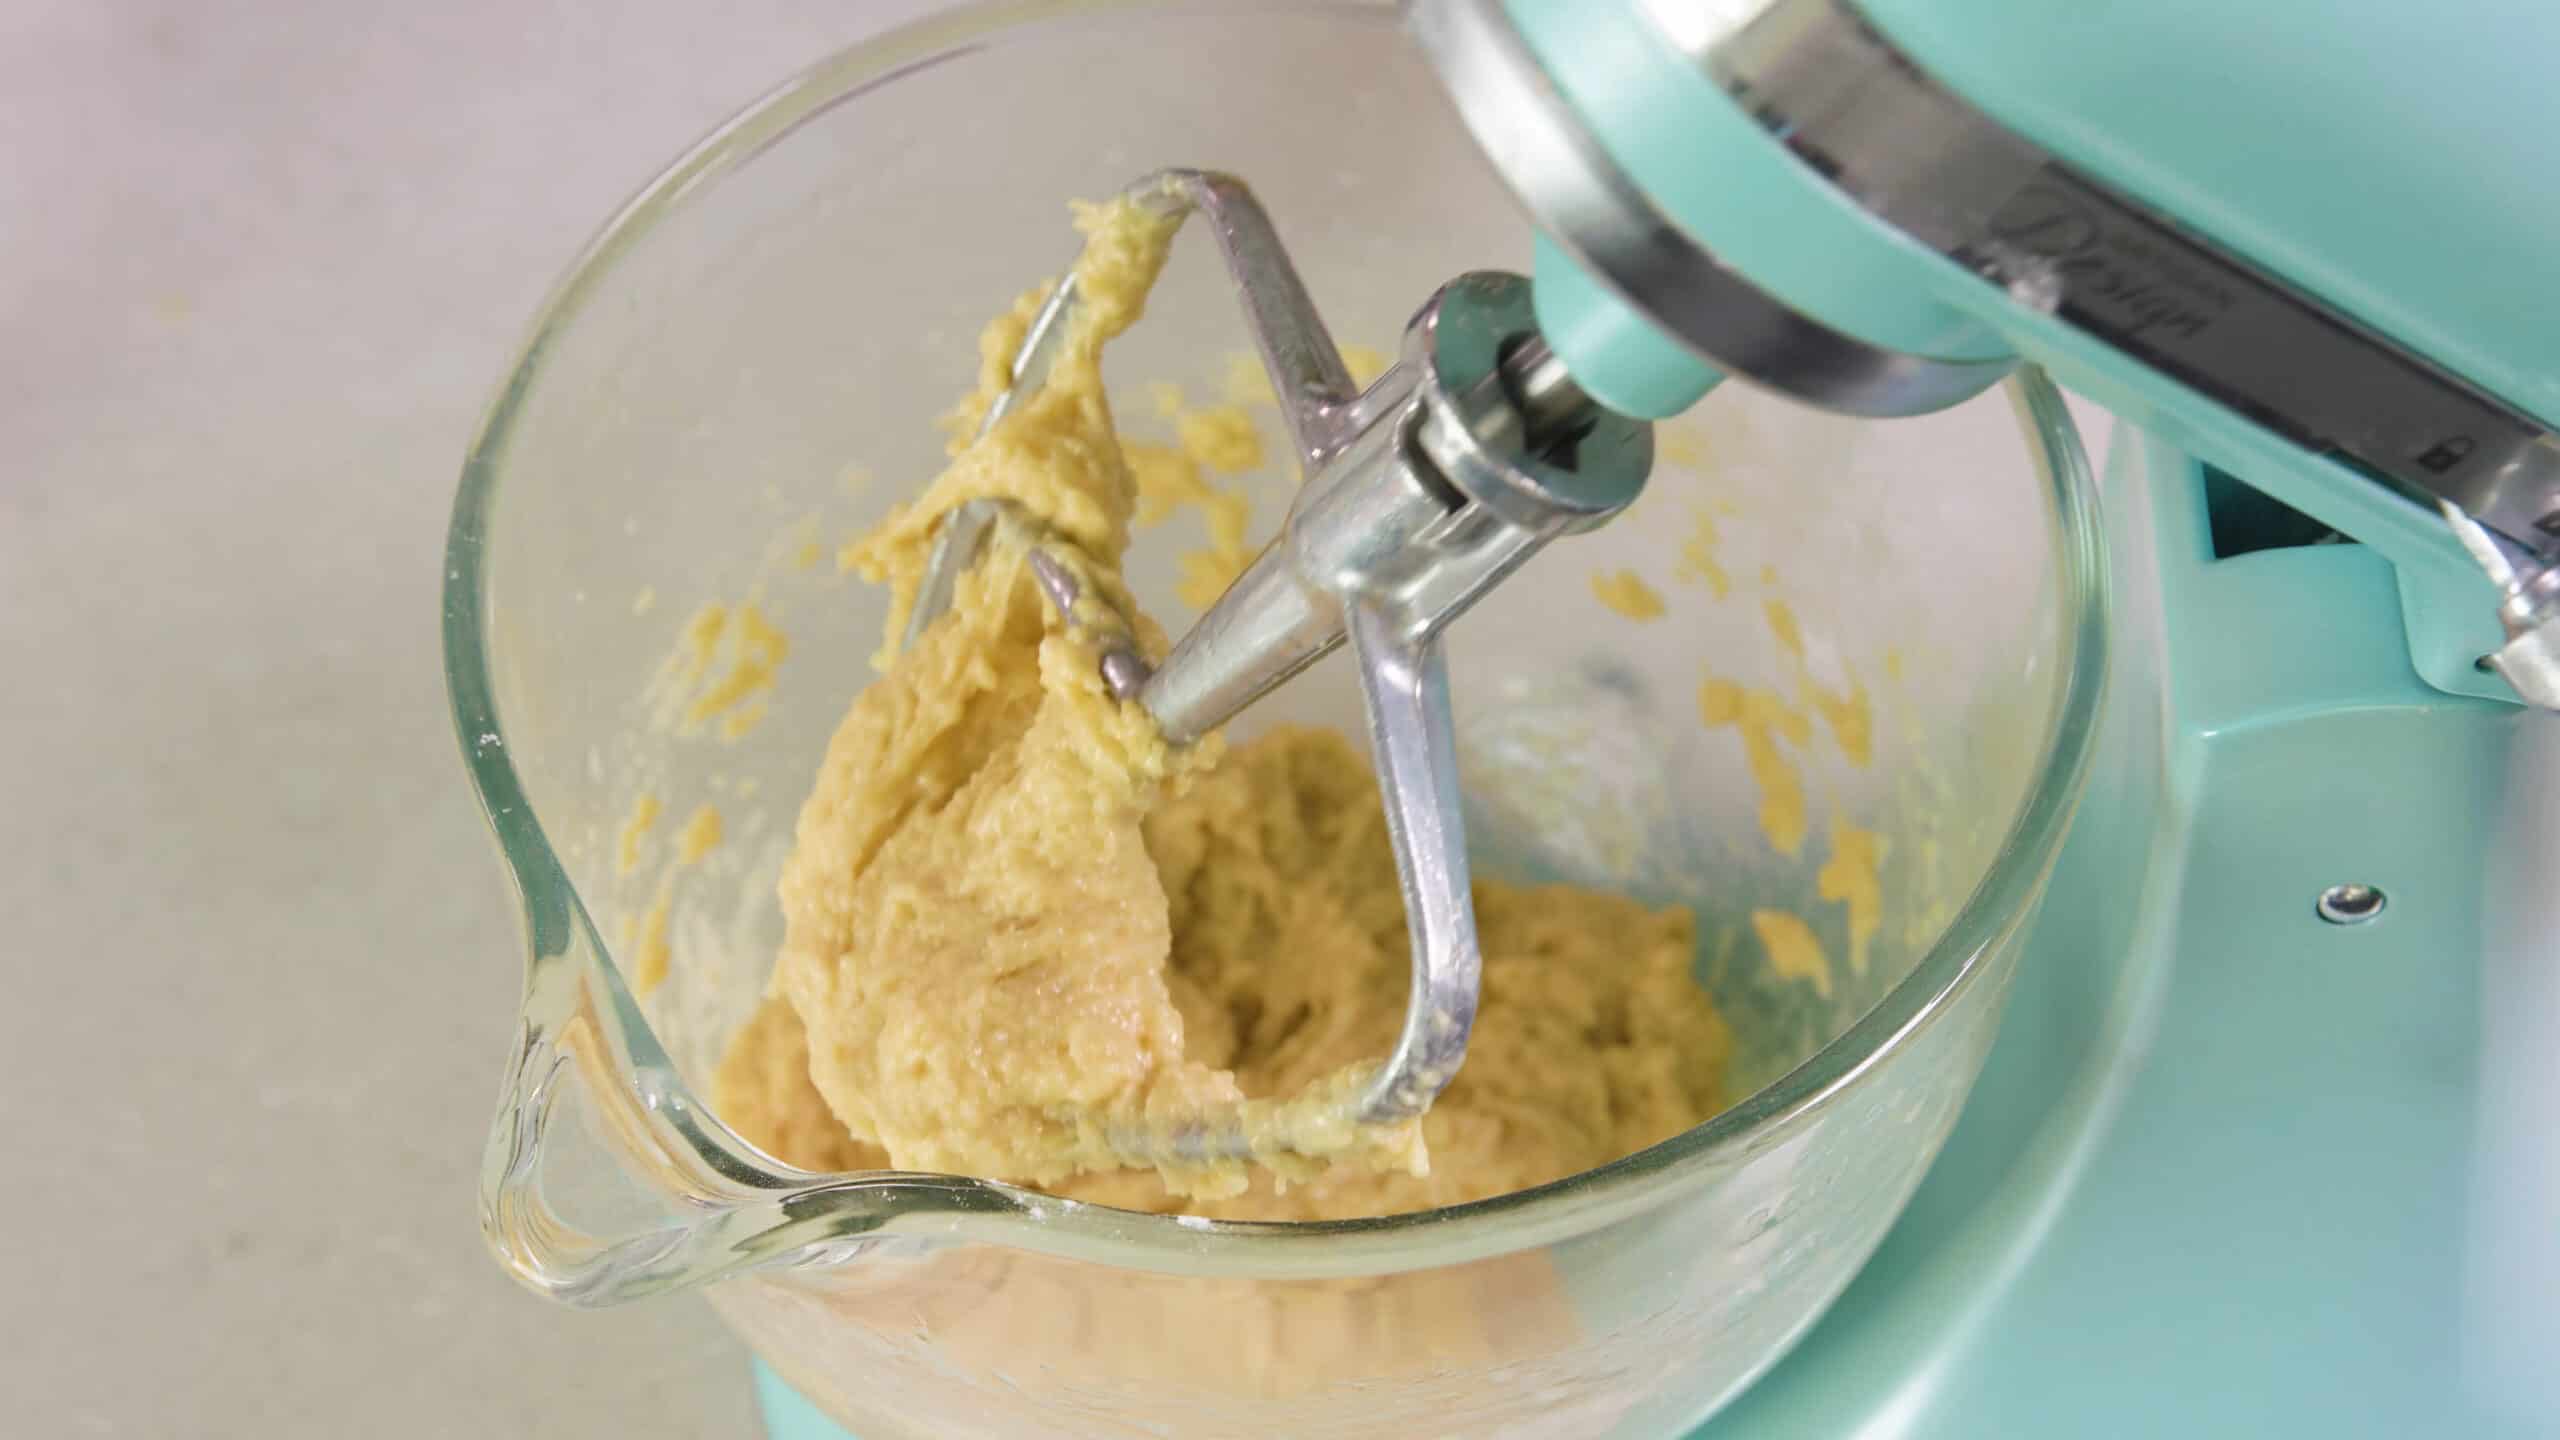 Close-up view of mixing bowl with the mixing attachment to the mixer showing the texture of the batter.